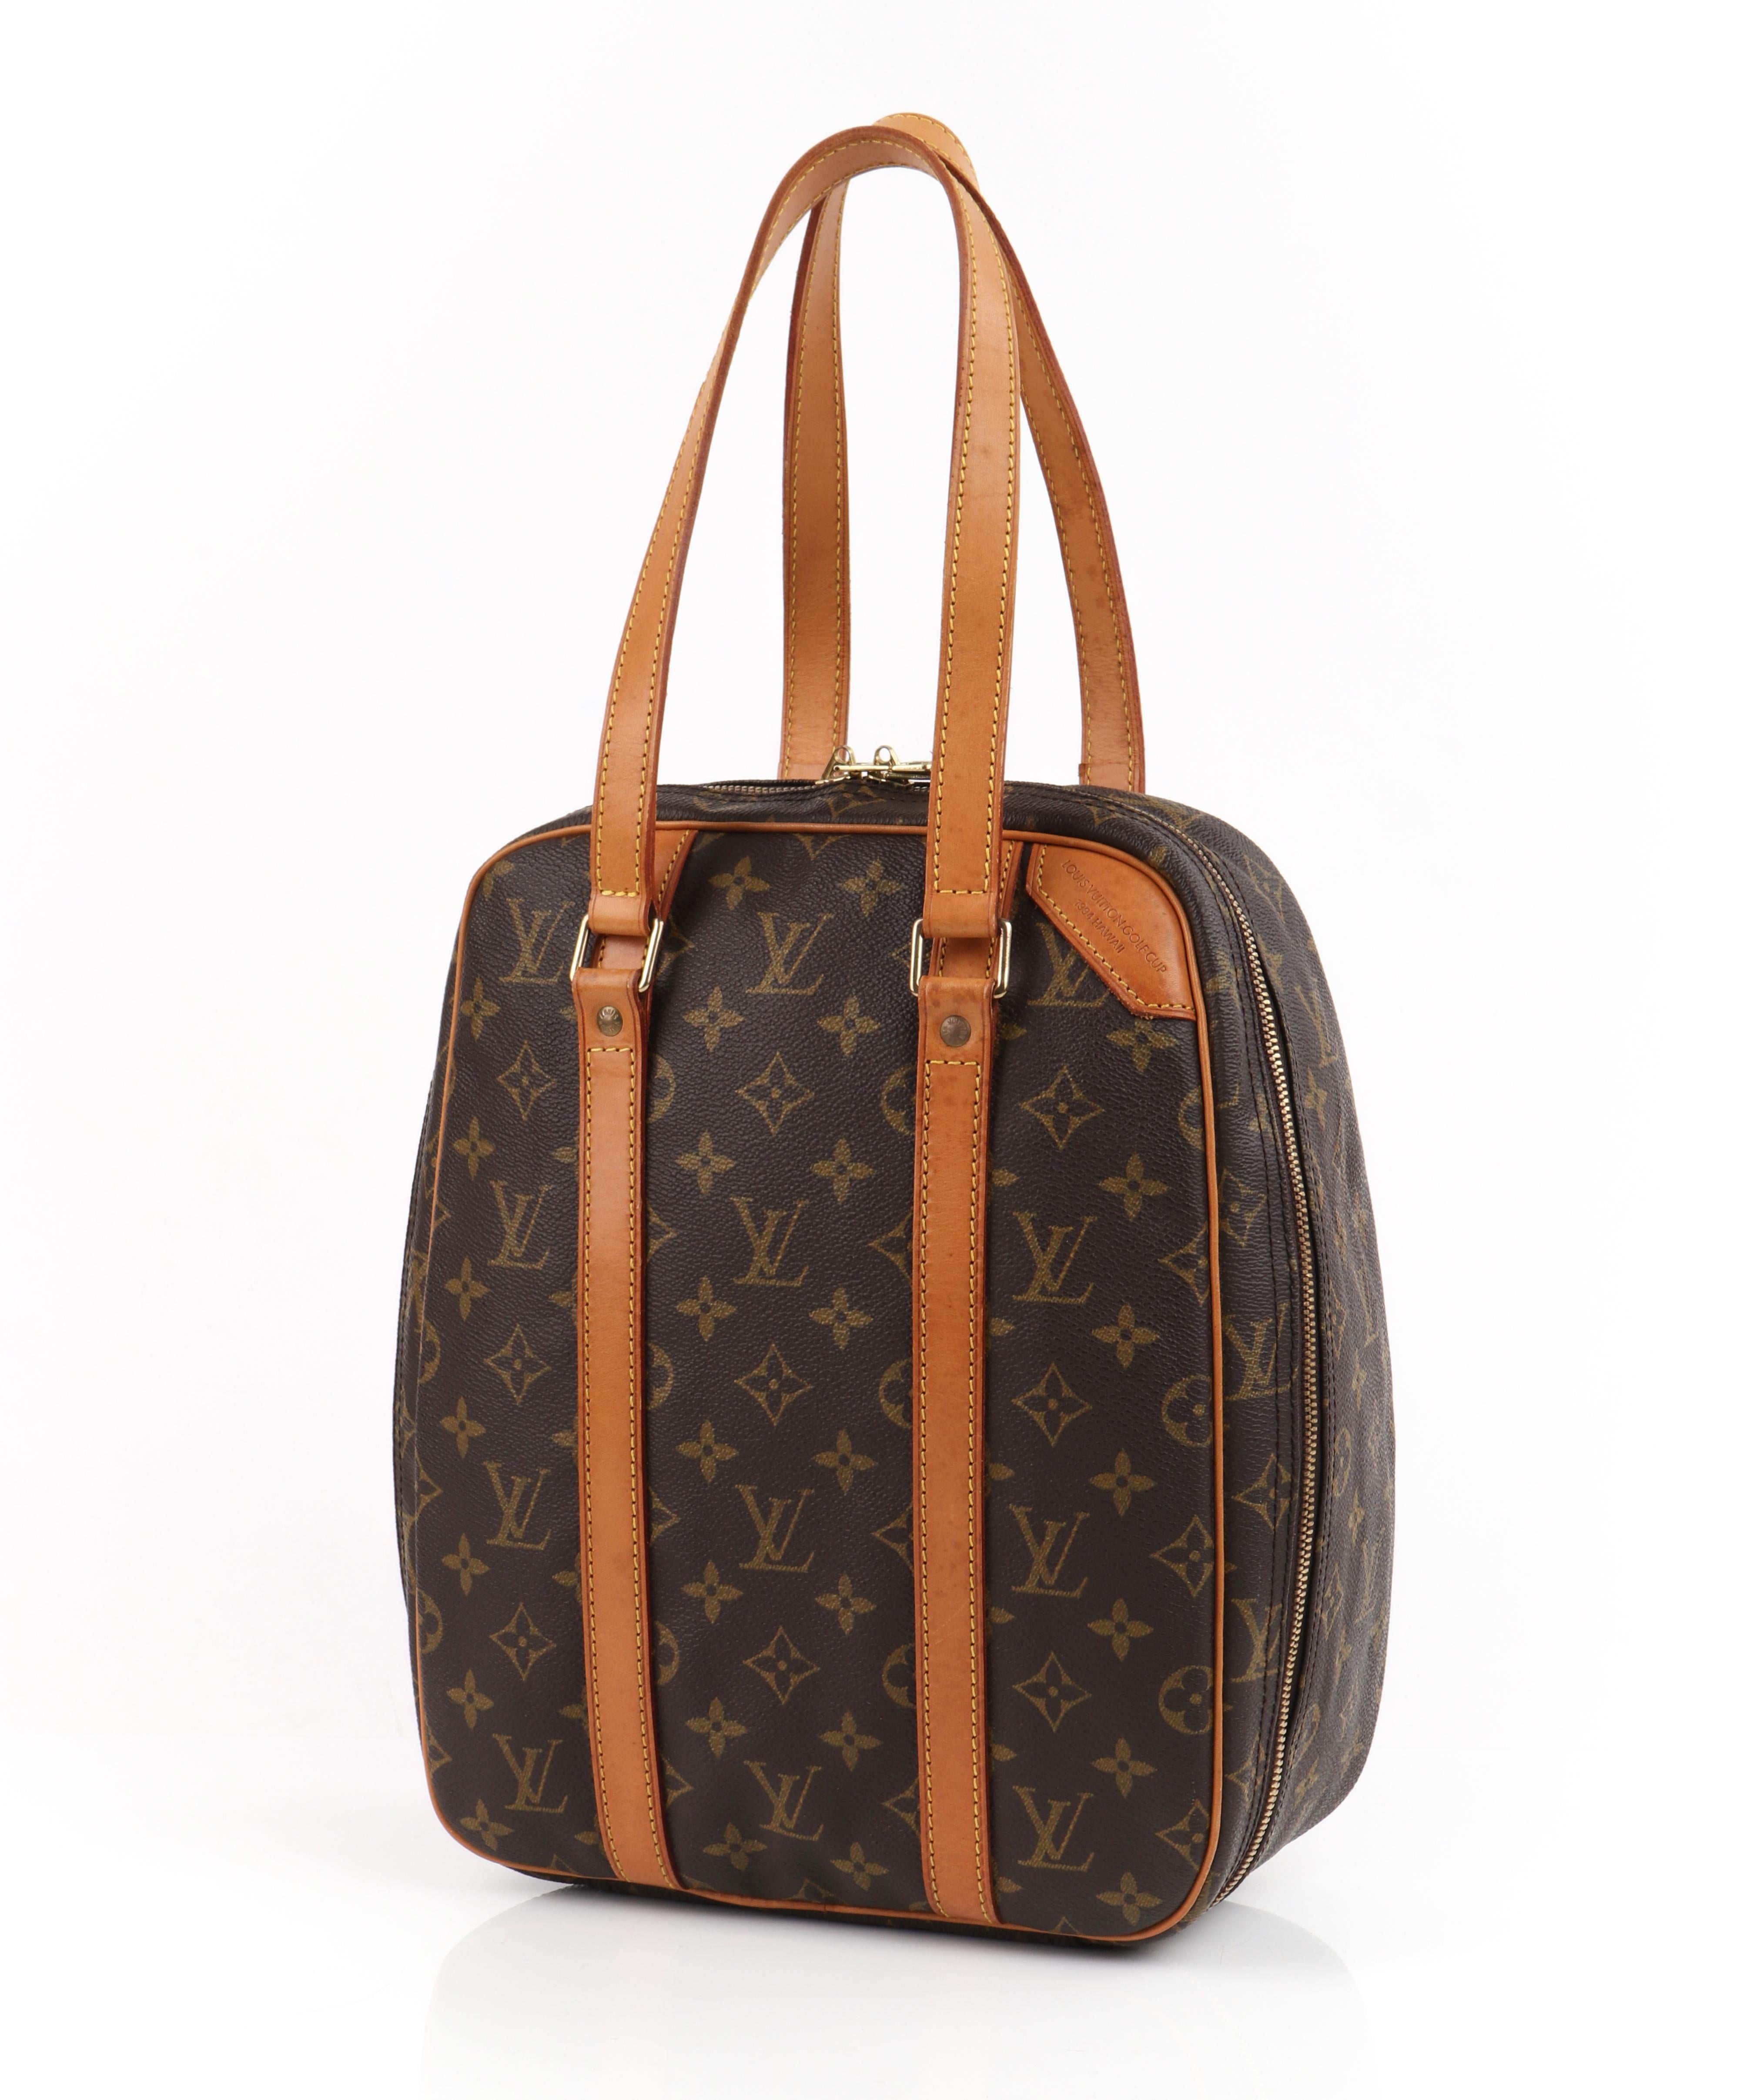 LOUIS VUITTON c.1994 Limited Edition Golf Cup Hawaii LV Monogram Excursion/Golf Shoe Bag
 
Brand / Manufacturer: Louis Vuitton
Collection: c.1994
Style: Top handle zip bag
Color(s): Multi
Lined: No
Unmarked Fabric Content: Coated canvas & leather